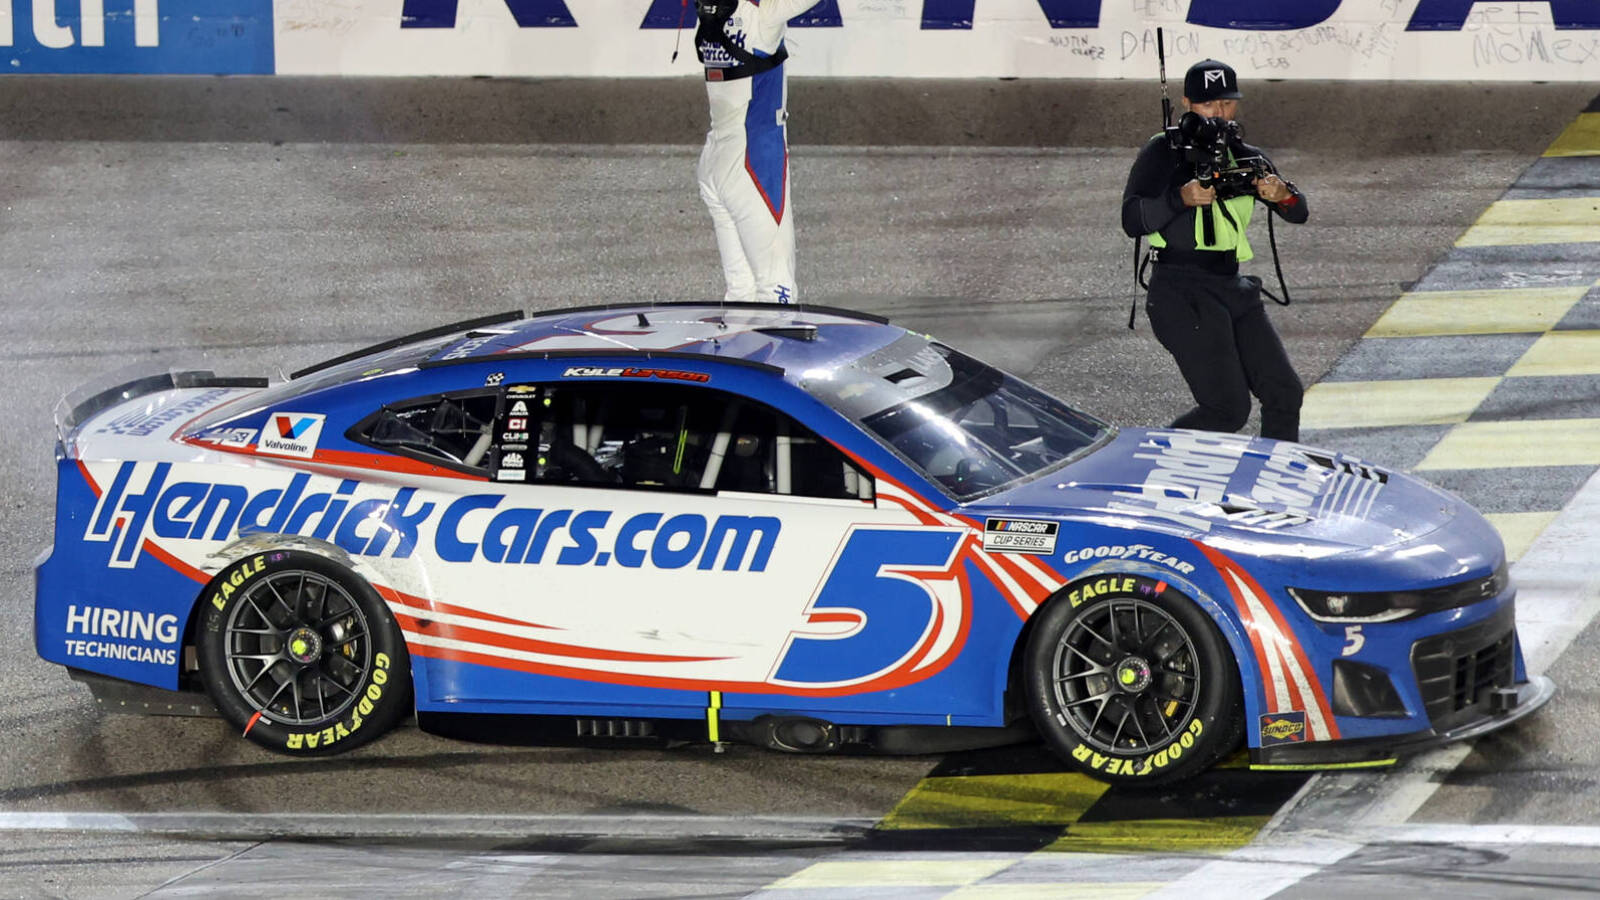 Reporter provides clarity on controversial NASCAR finish at Kansas